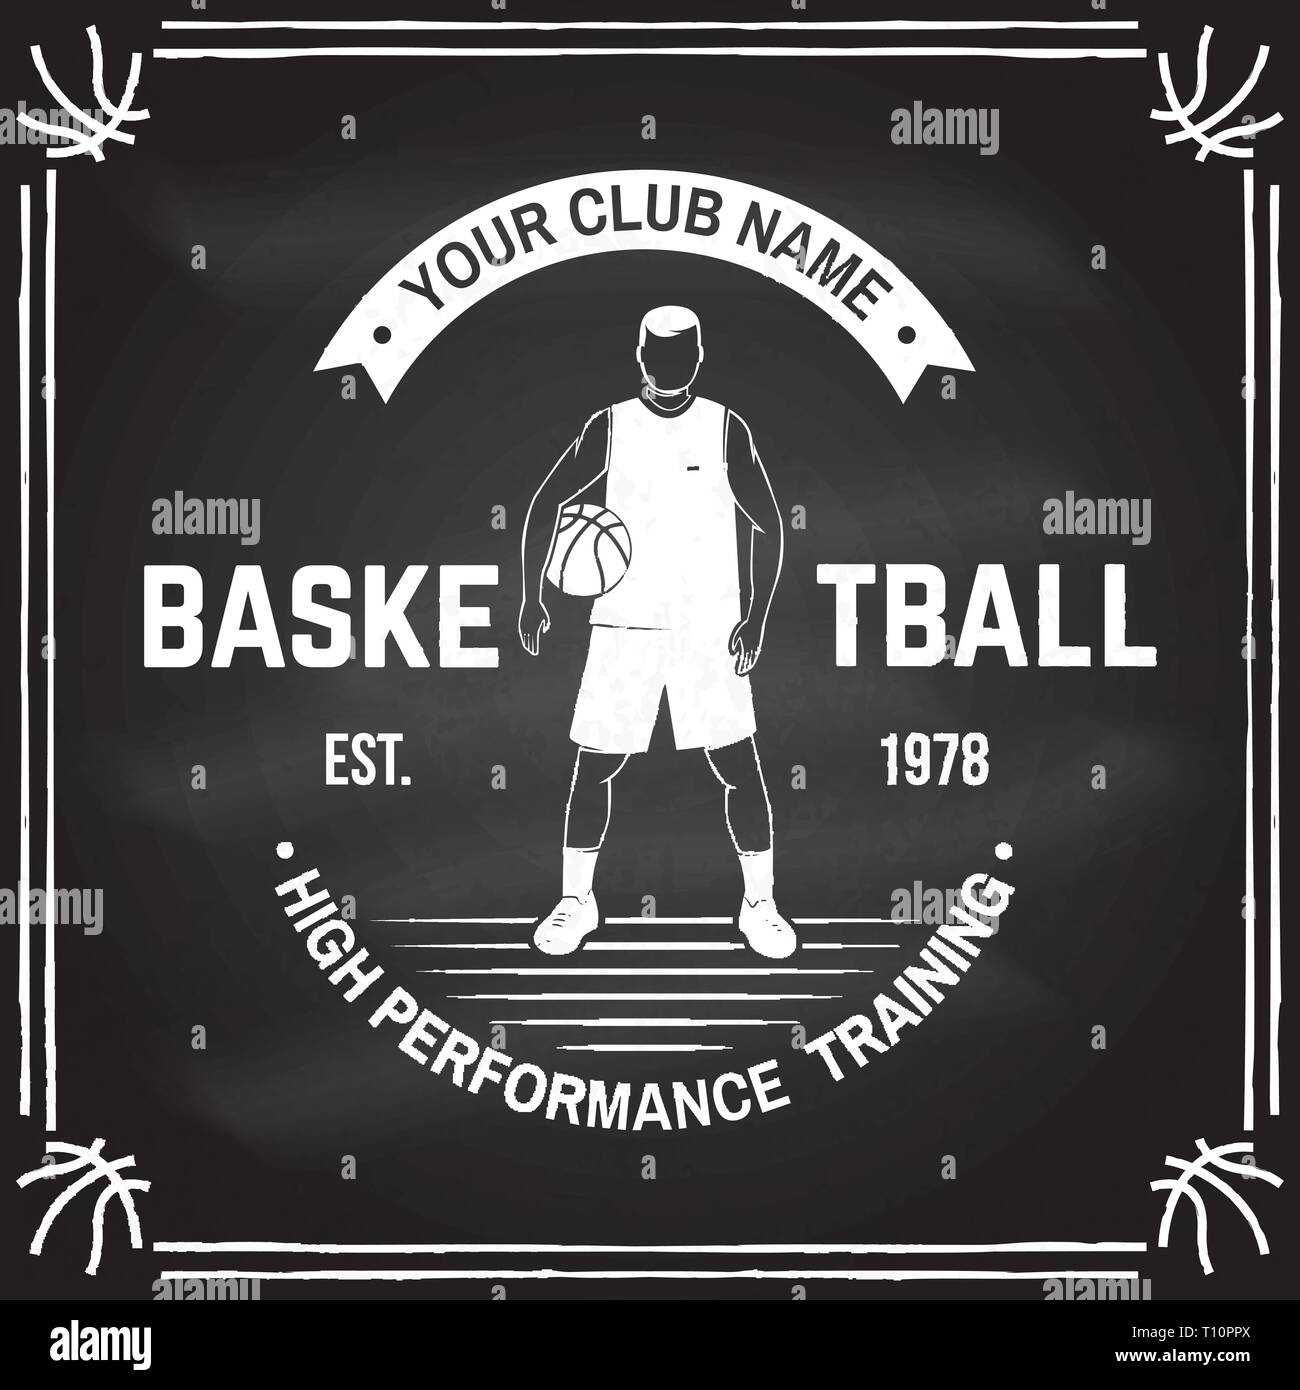 Basketball club badge on the chalkboard. Vector illustration. Concept for shirt, print, stamp or tee. Vintage typography design with basketball player and basketball ball silhouette Stock Vector